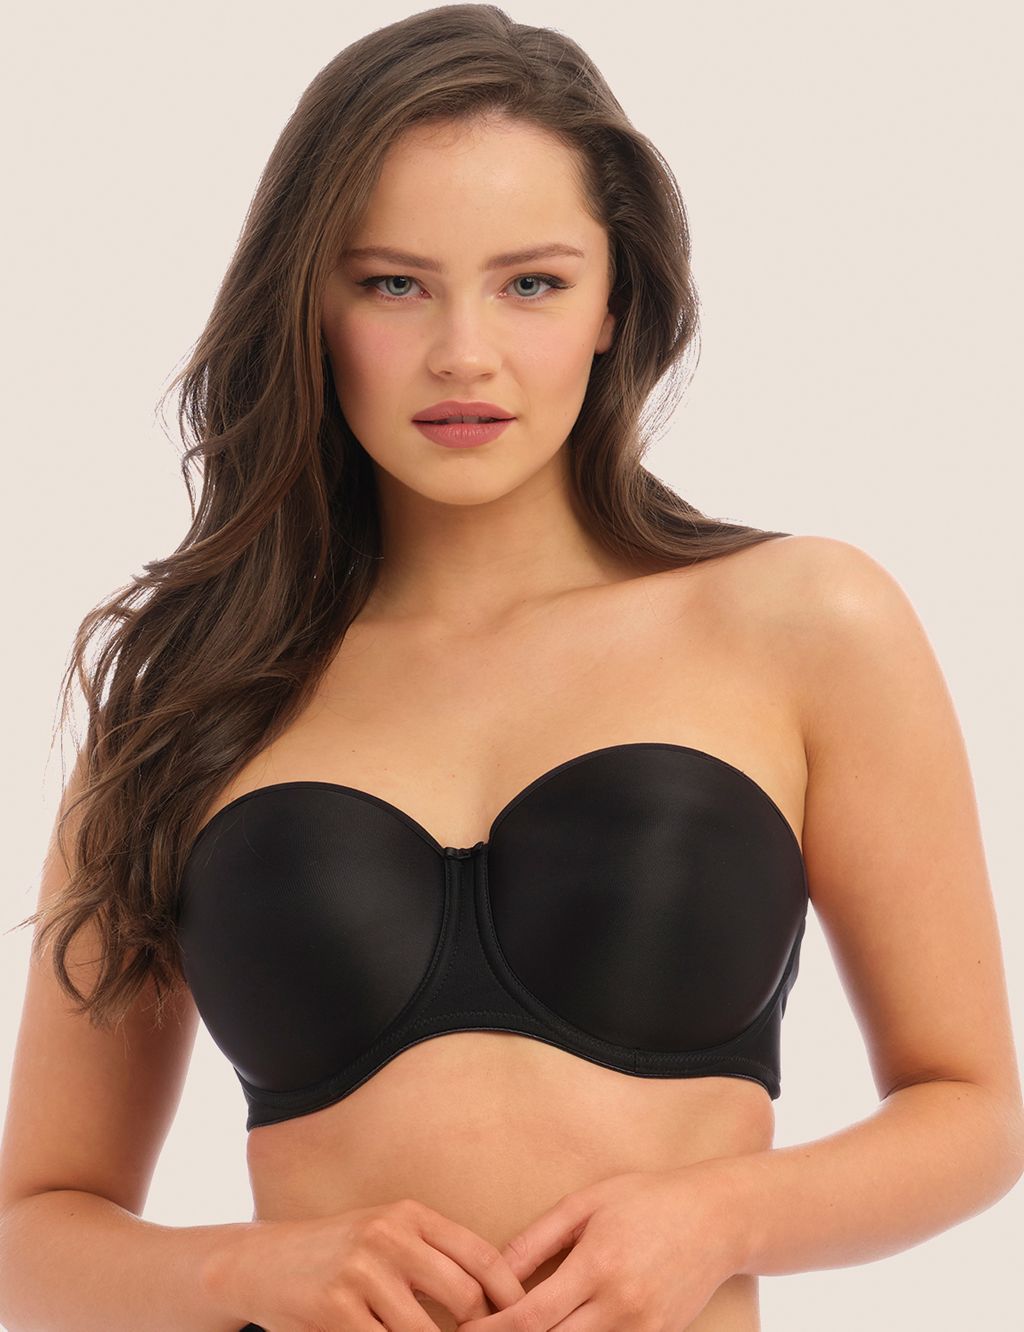 Smoothing Wired Moulded Strapless Bra C-G, Fantasie